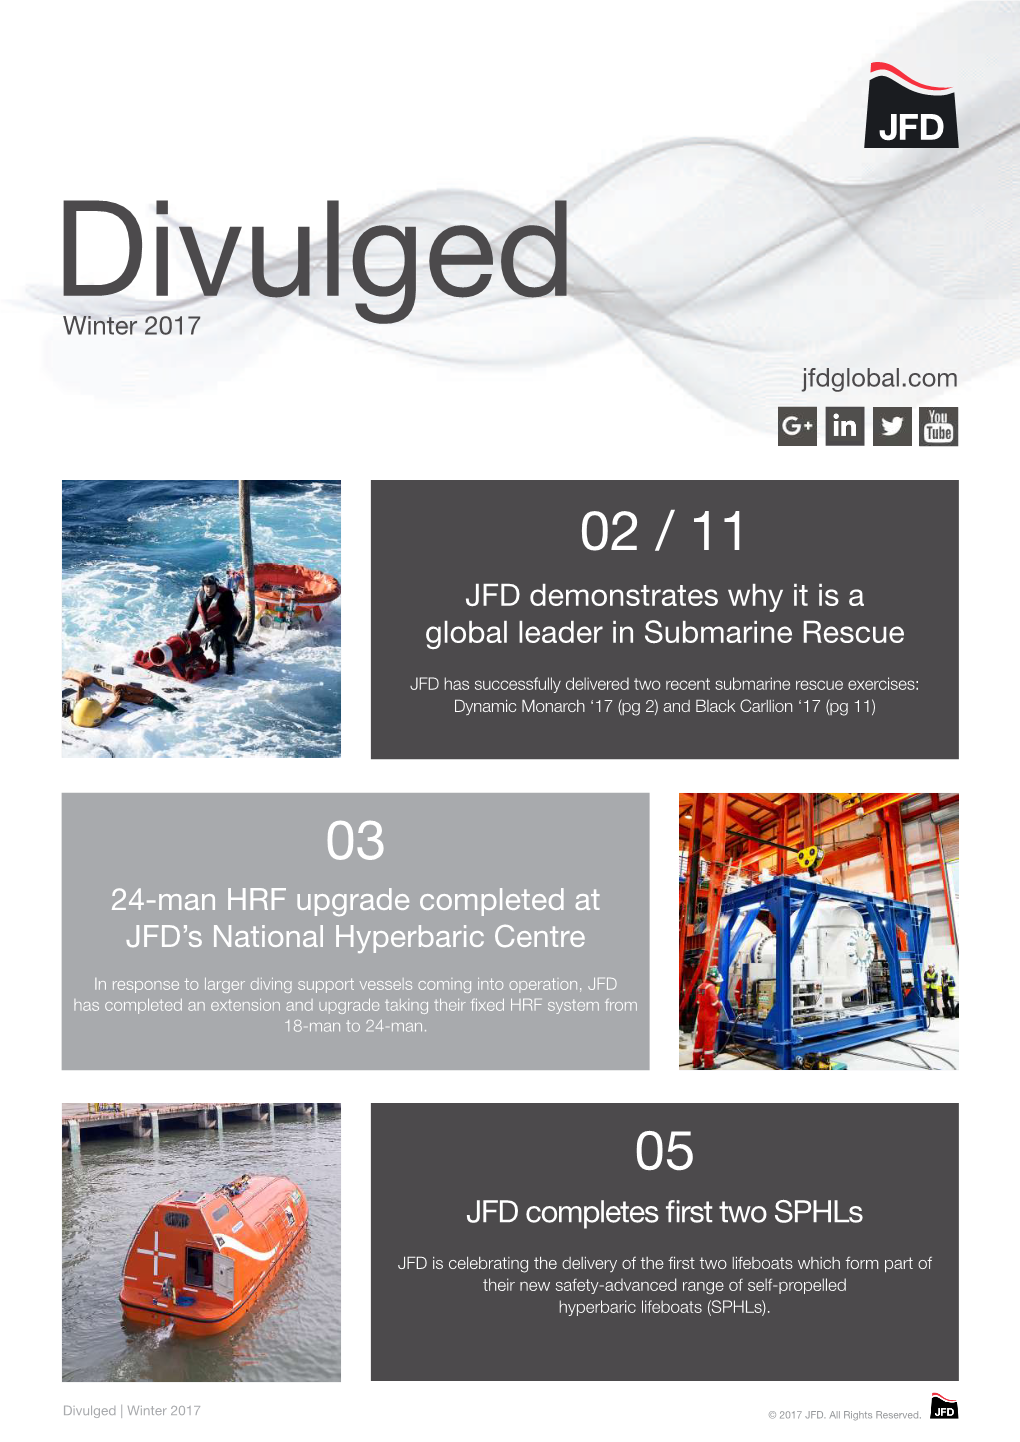 JFD Completes First Two Sphls JFD Demonstrates Why It Is a Global